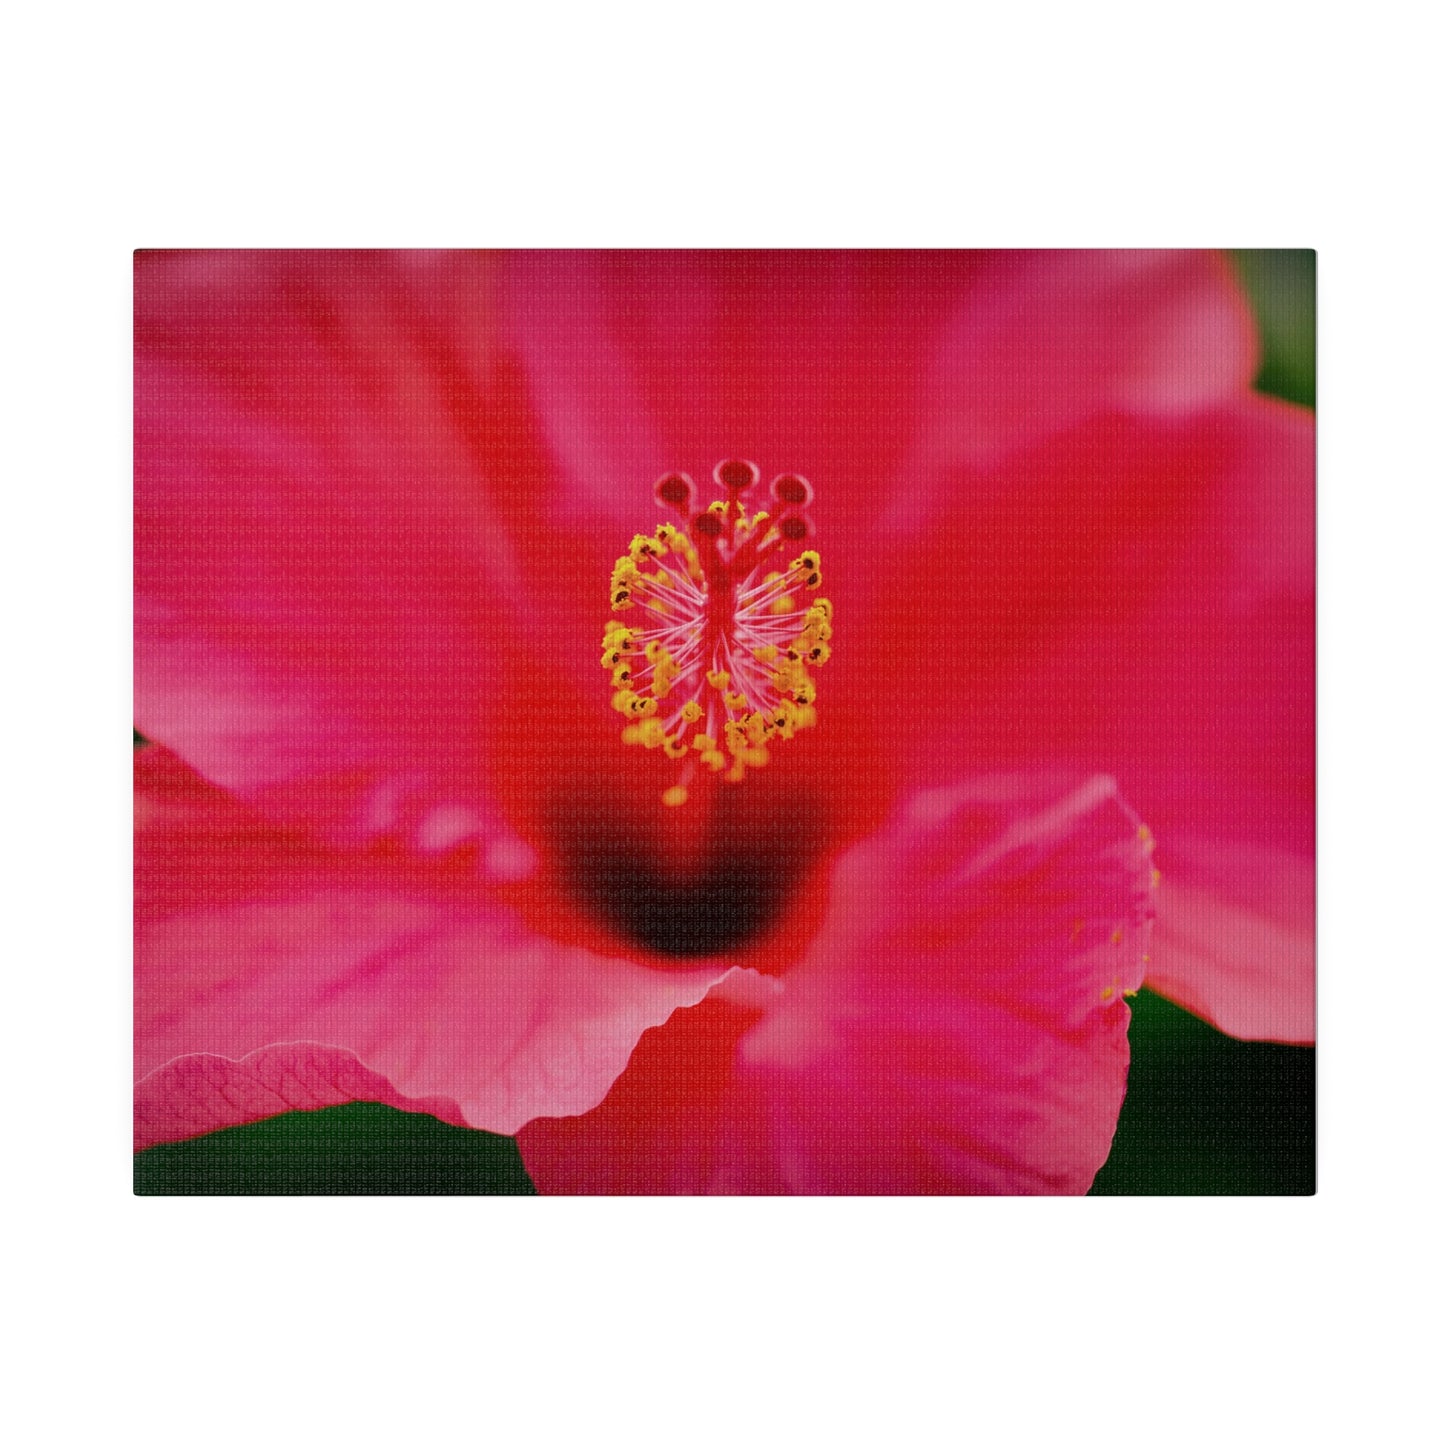 A beautiful hibiscus flower printed on a stretched matte canvas